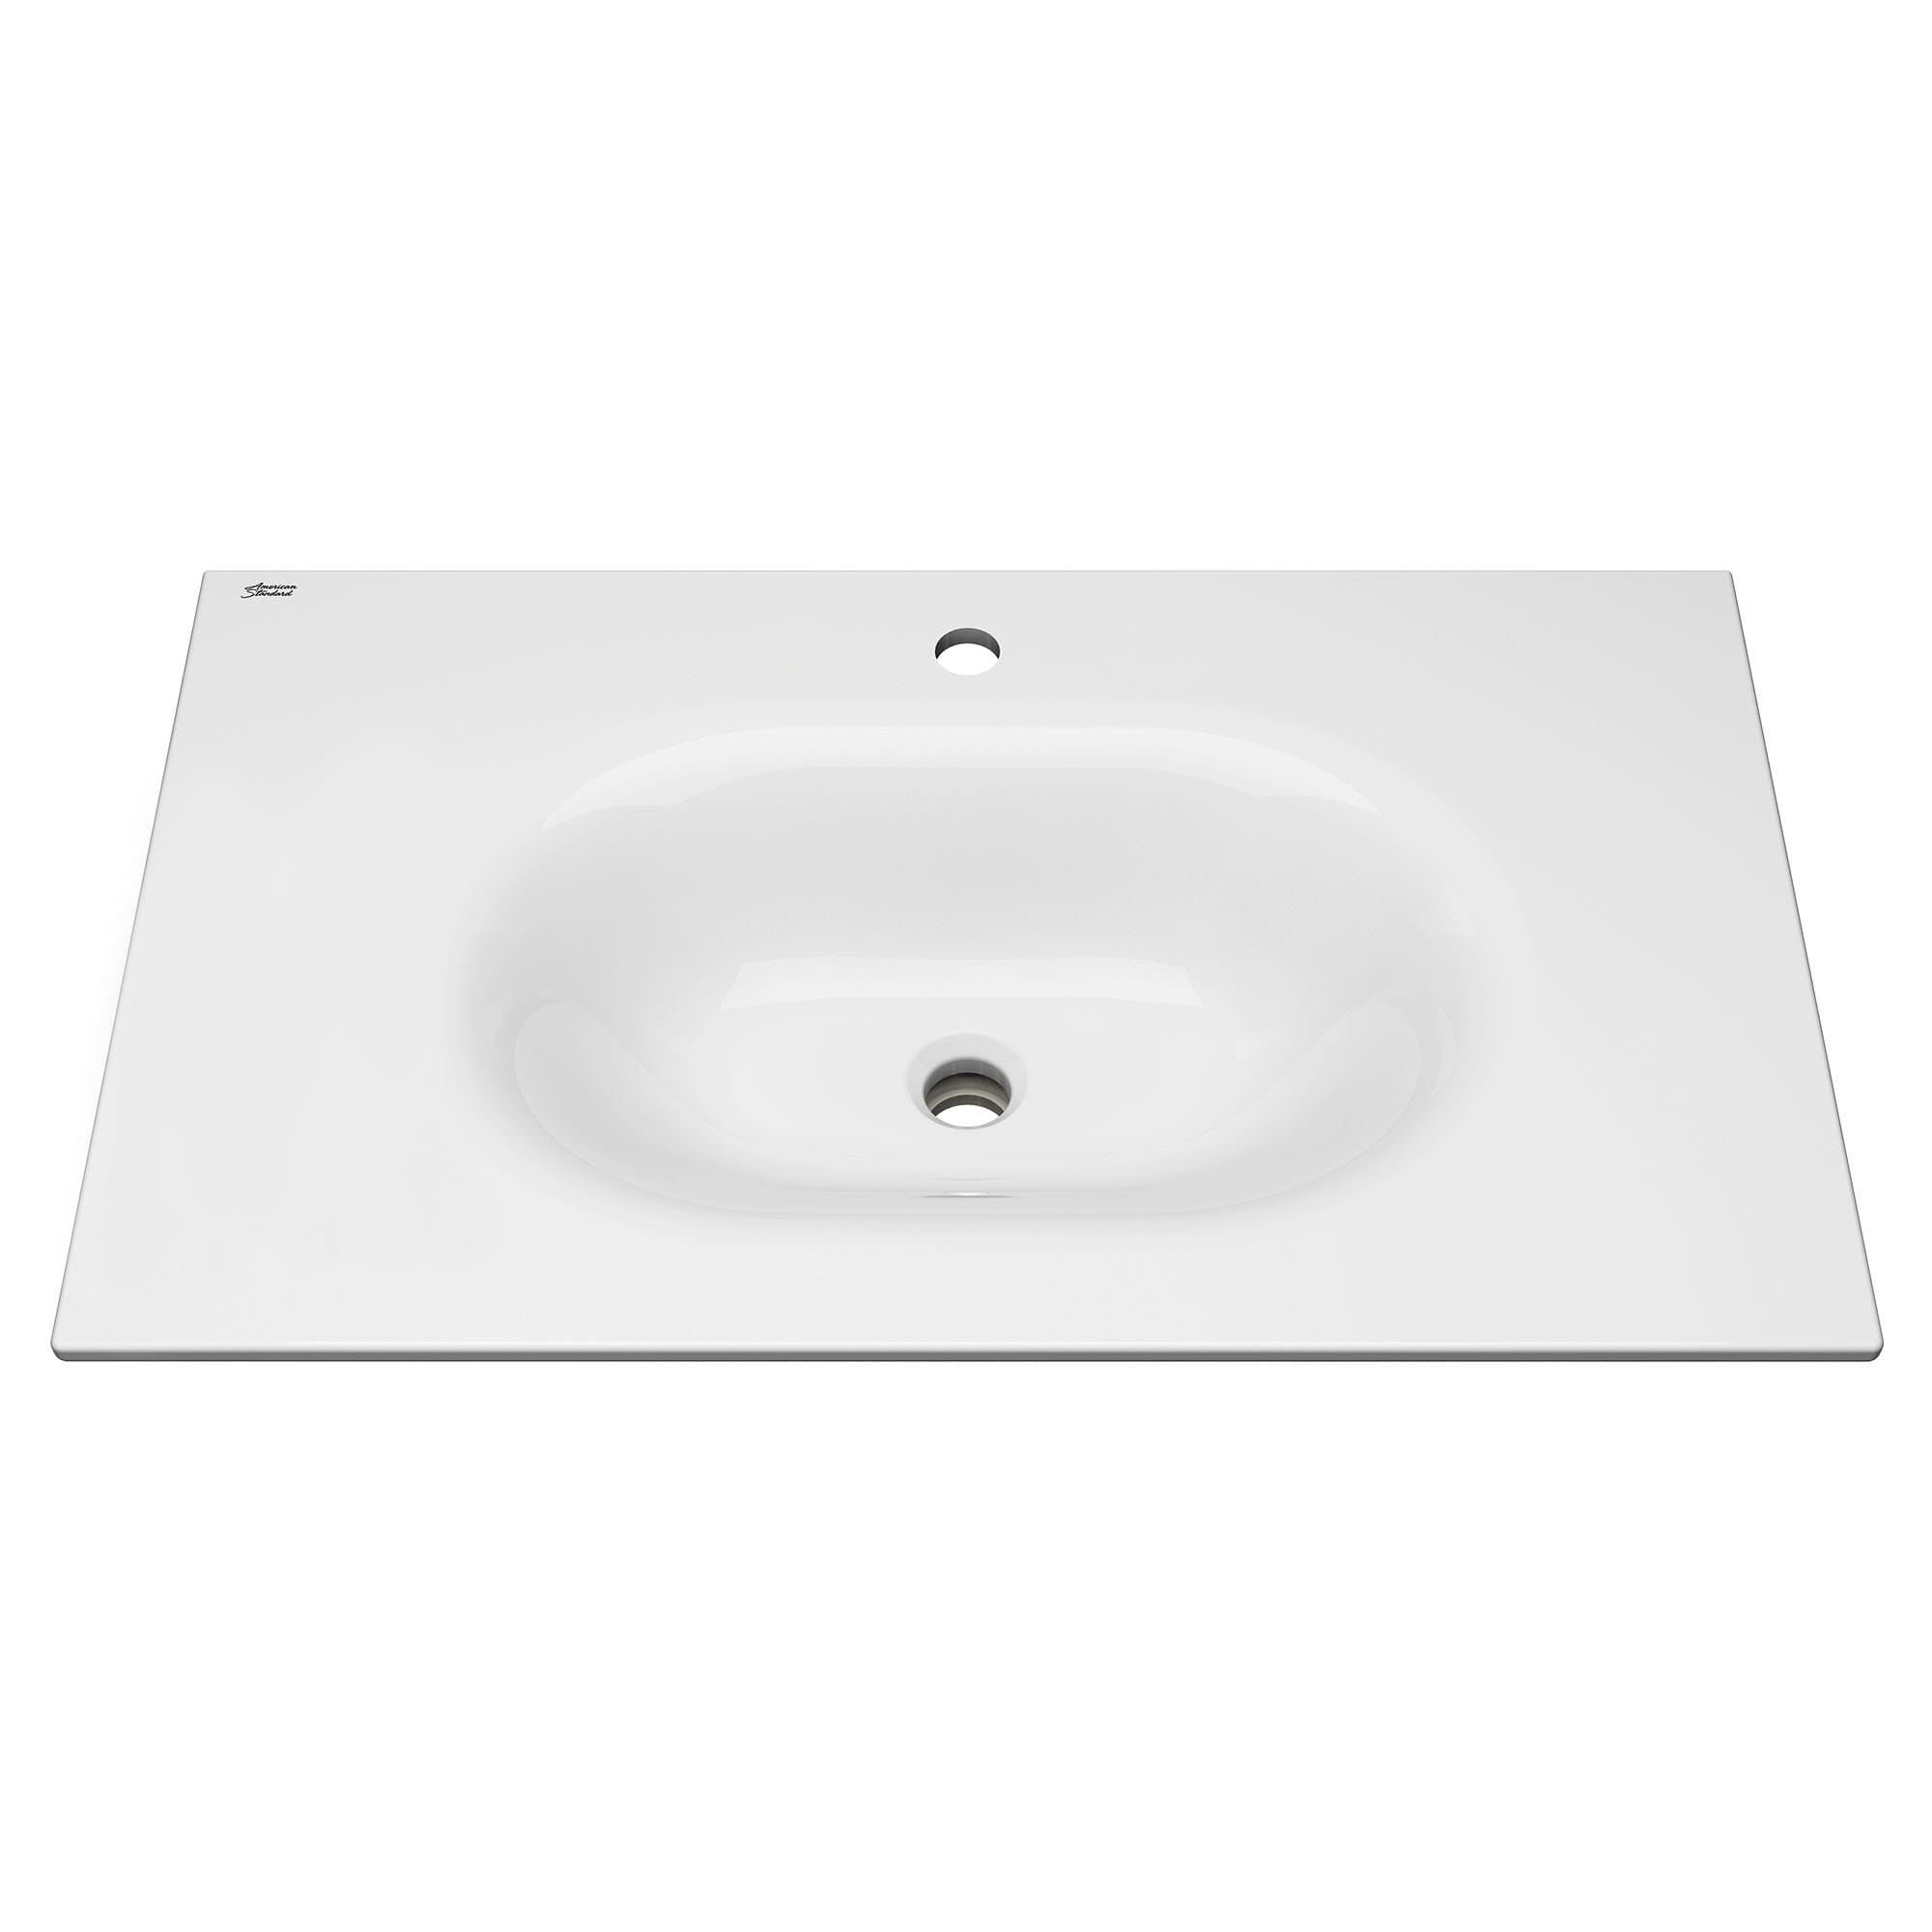 Studio® S 33-Inch Vitreous China Vanity Sink Top Center Hole Only